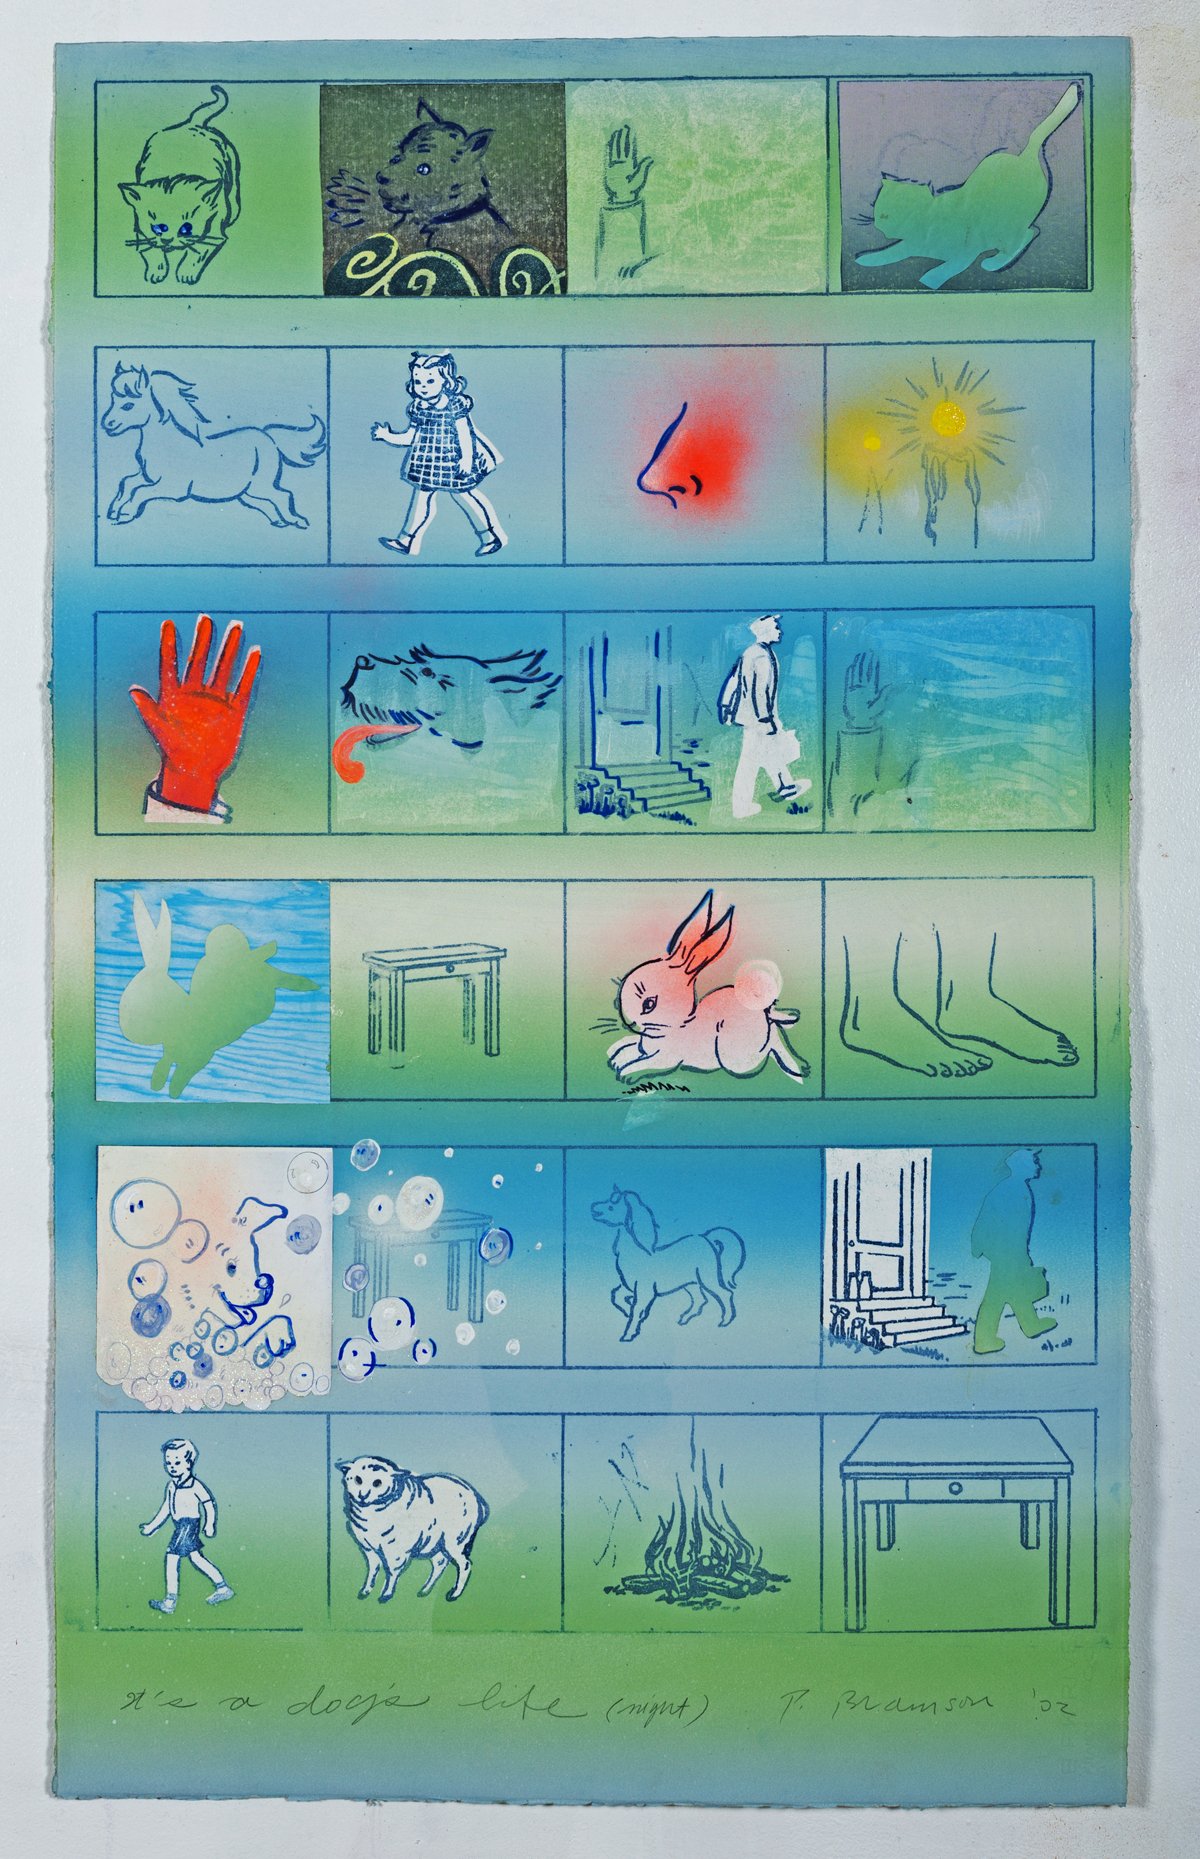 A Day in a Dog’s Life #1, 30" × 22", monoprint, 2000